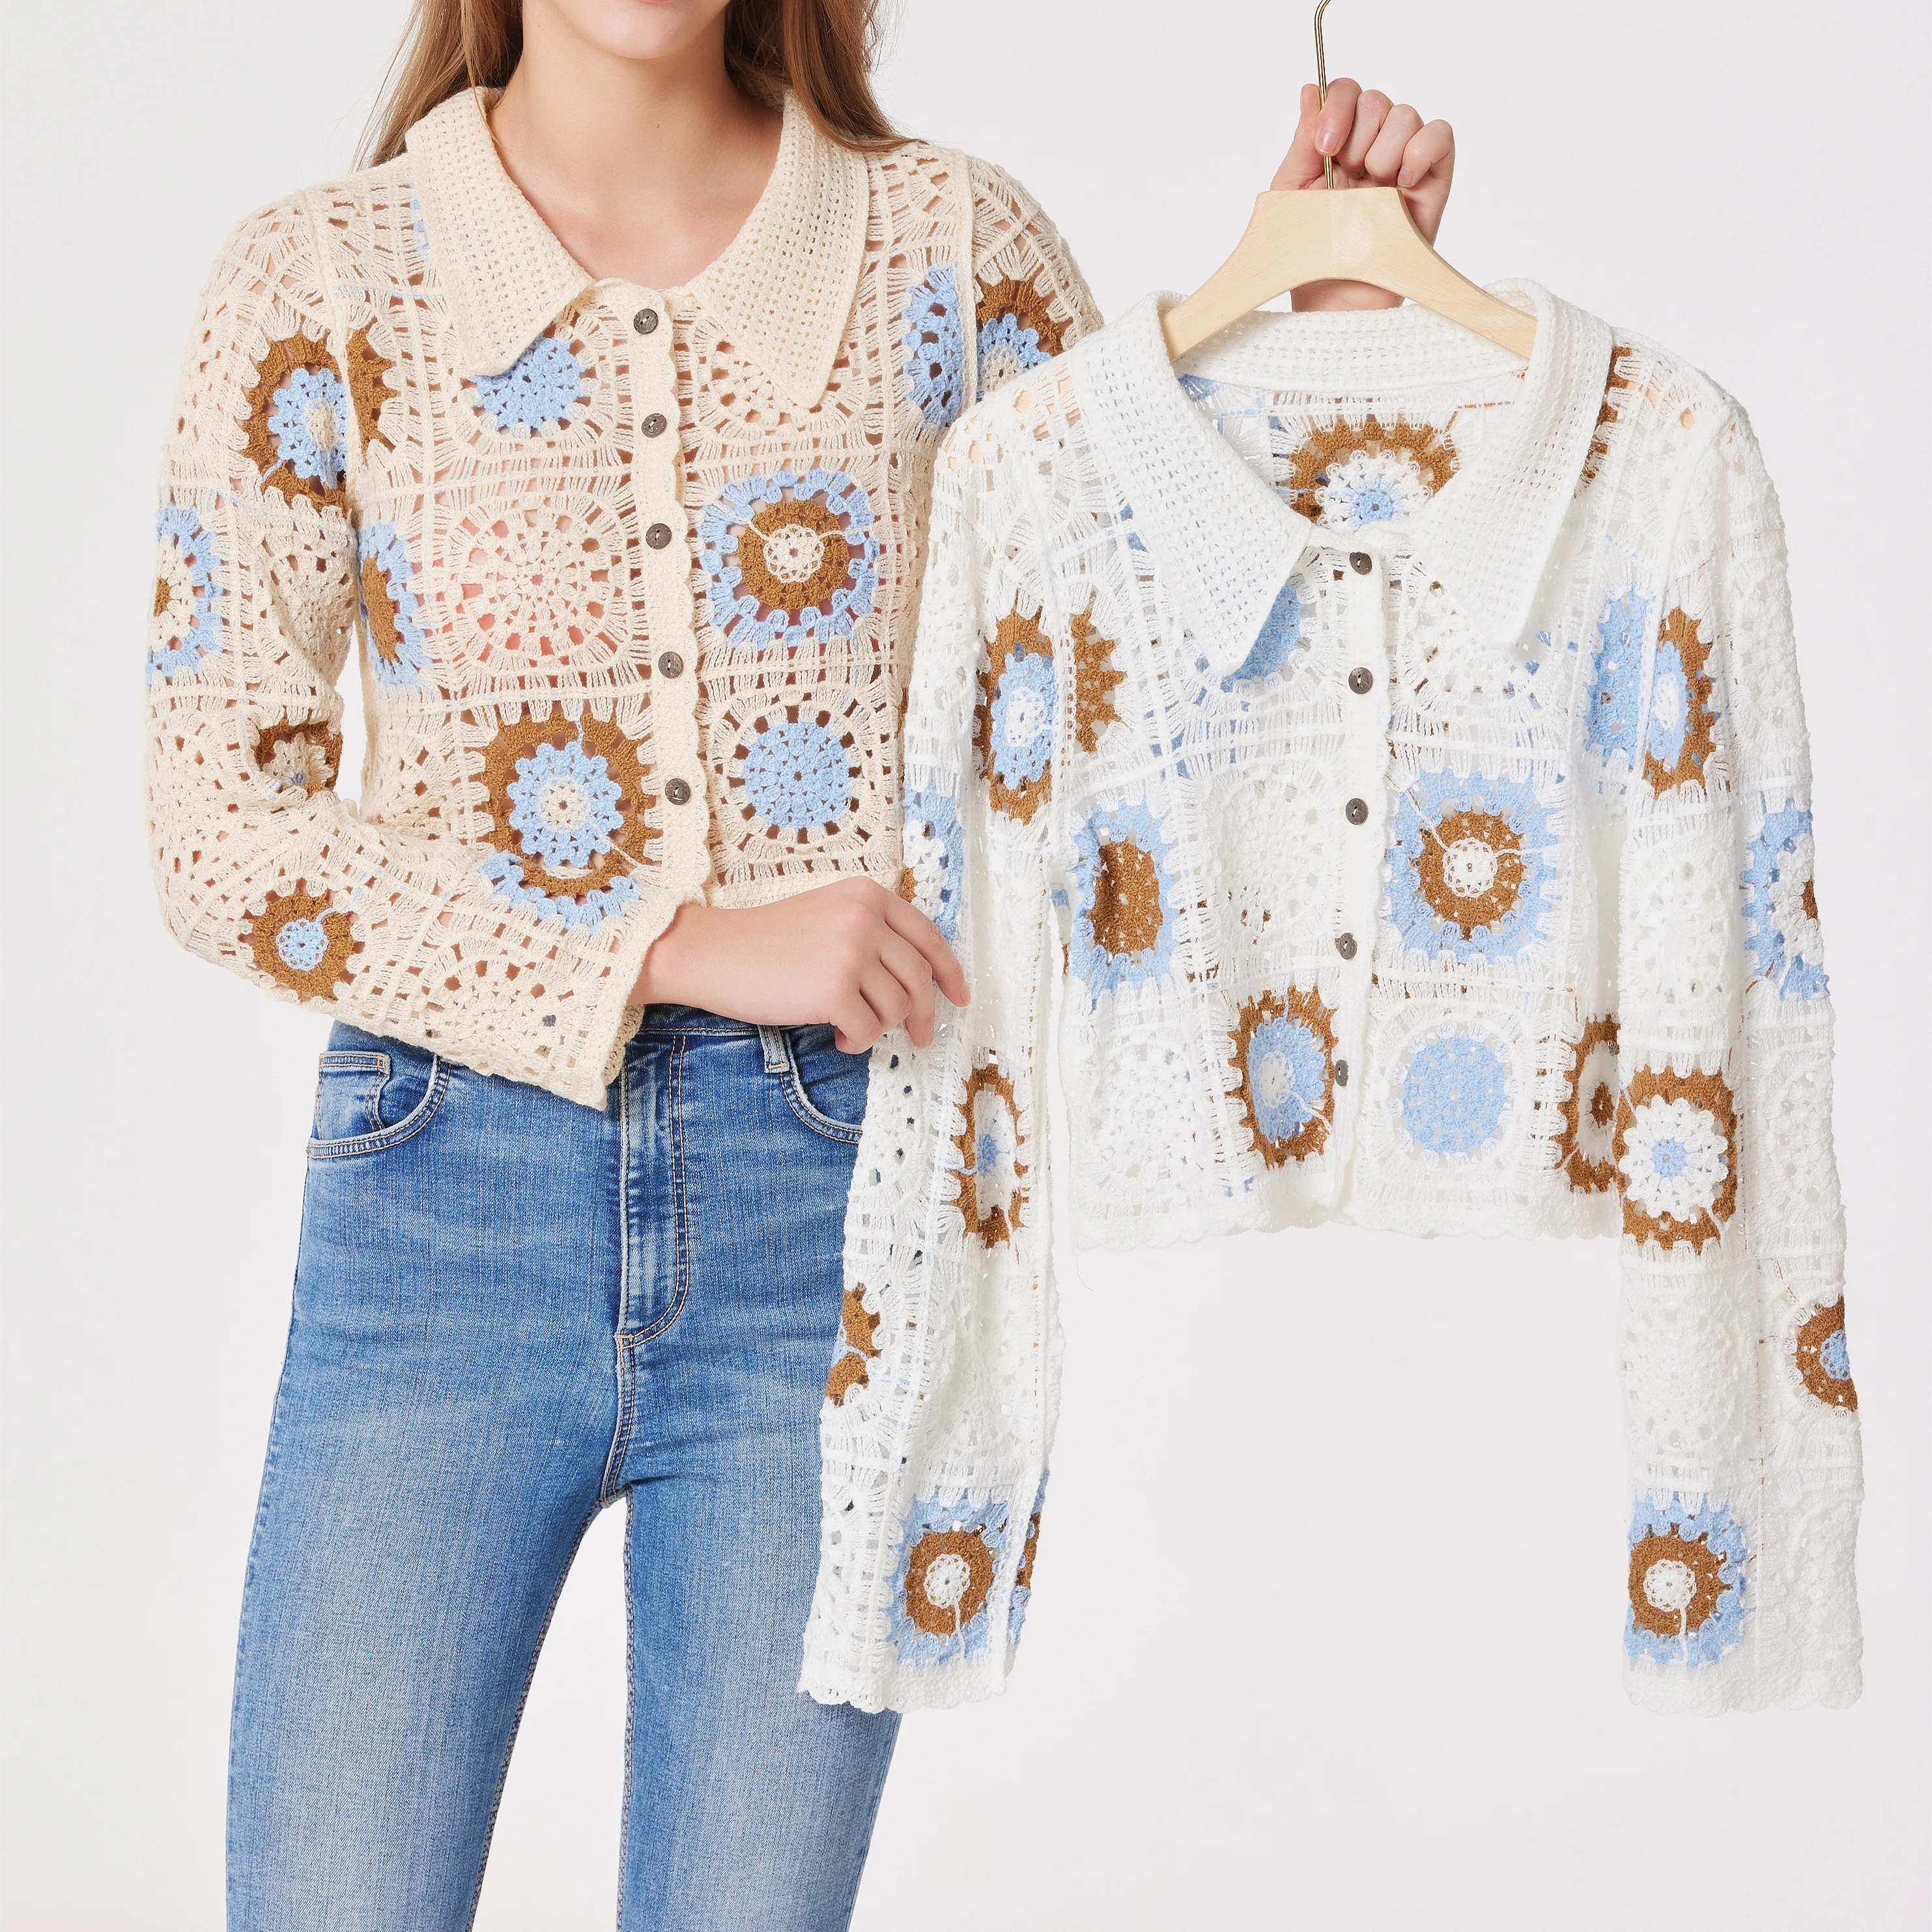 Button Up Hollowed Out Flower Knitted Cropped Cardigan Women Korean Fashion Long Sleeve Kawaii Sweater Femme Cheap Wholesale